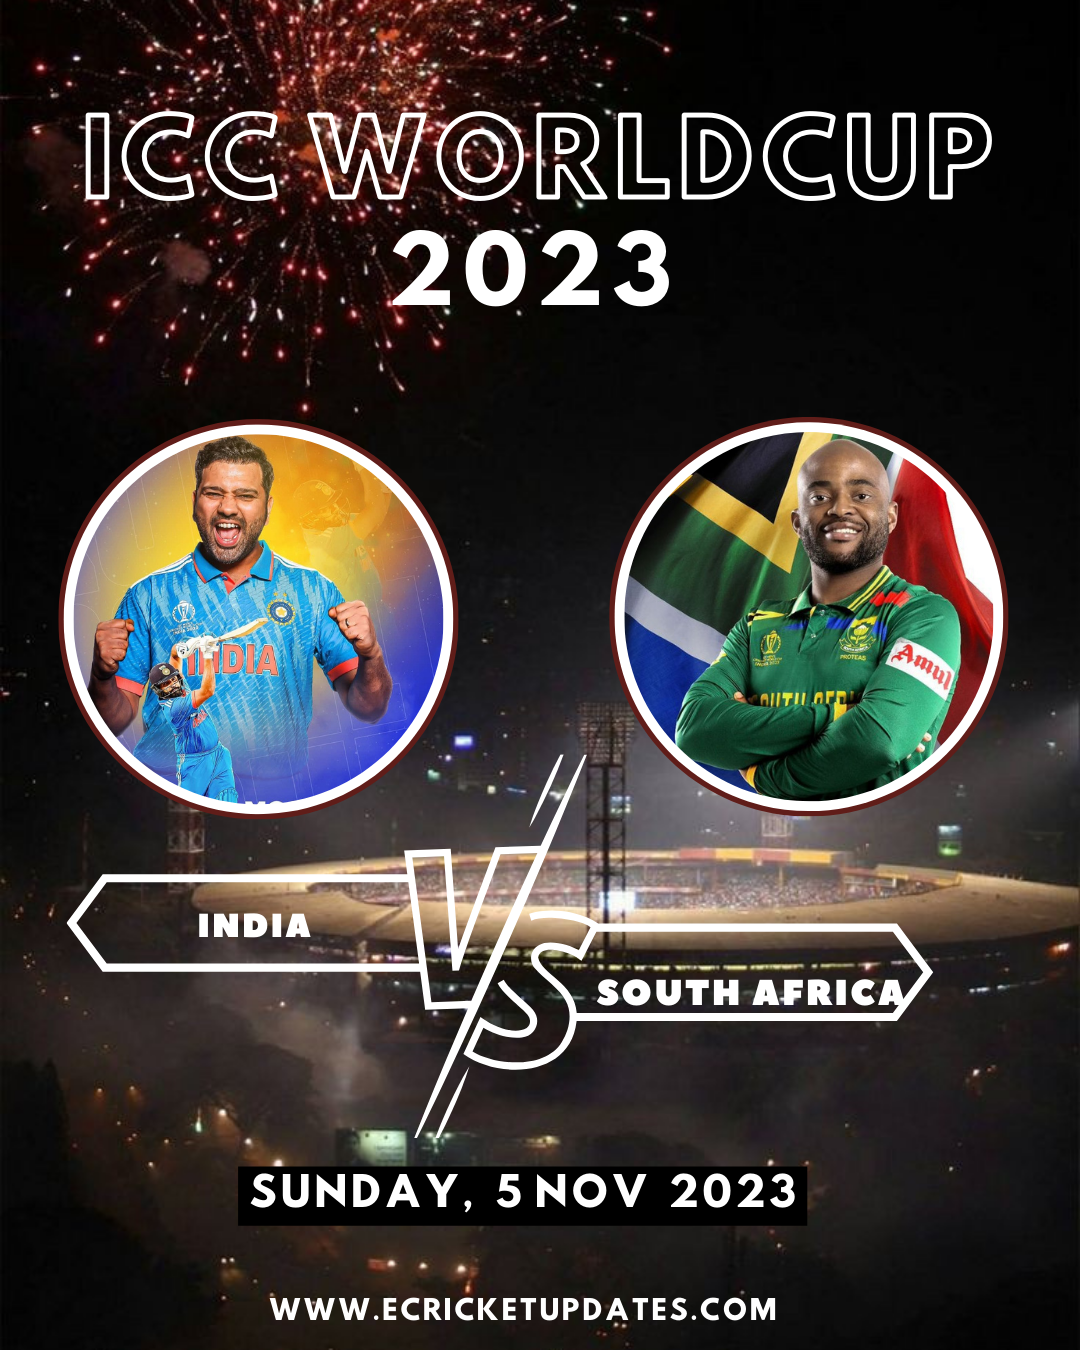 India vs South Africa World Cup 2023 Showdown